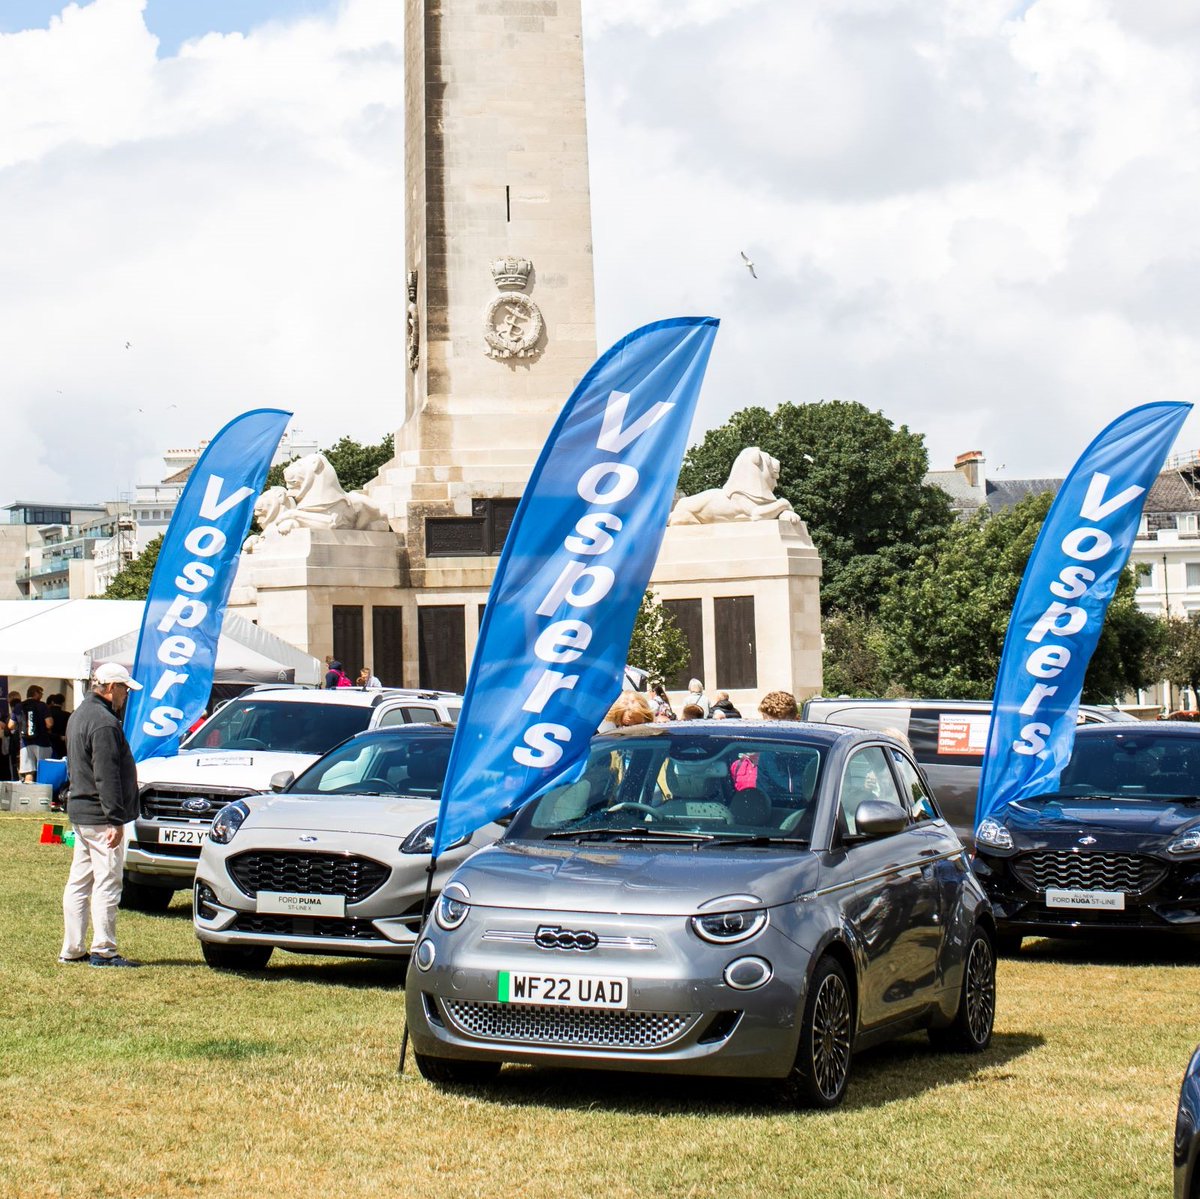 🇬🇧📣Plymouth Armed Forces Day is delighted to welcome @VospersMotors and @MercedesBenz on 24 June, with a great selection of their vehicles on display on Plymouth Hoe. Head to the website for the complete list of activities and displays: ow.ly/hUEx50OzEbx